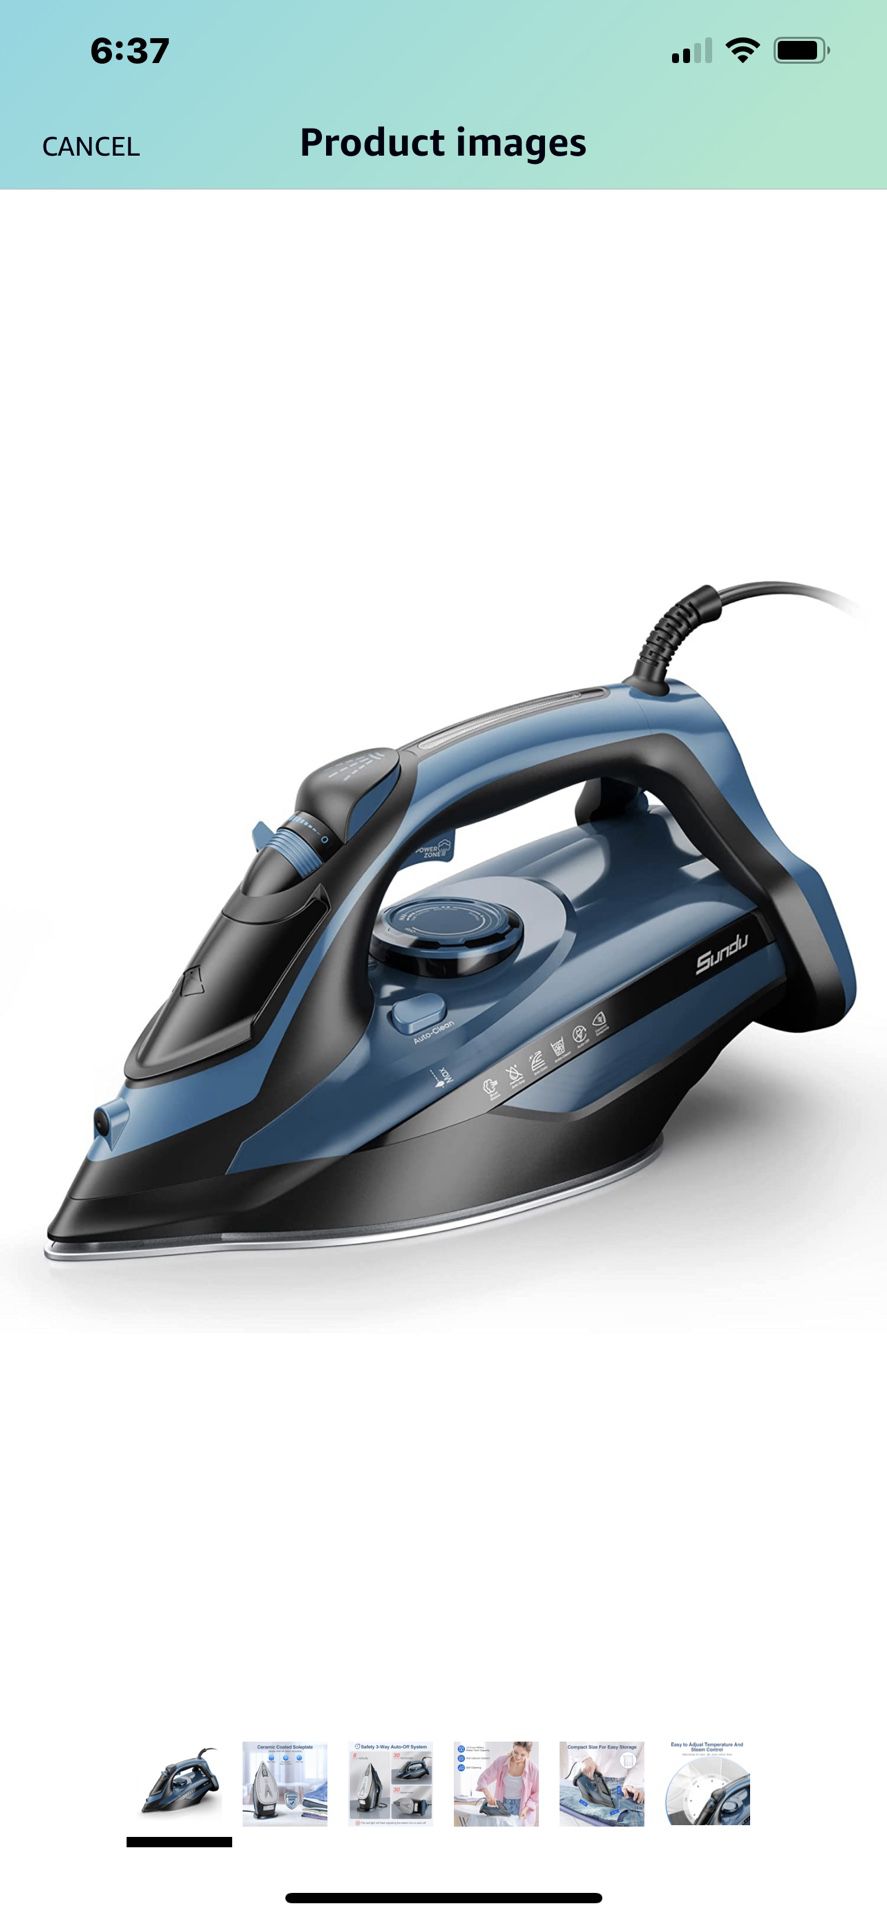 Steam Iron for Clothes with Rapid Heating Ceramic Coated Soleplate, 1700W Steam Iron with Precise Thermostat Dial, Self-Cleaning, Auto-Off, 15.21oz Wa